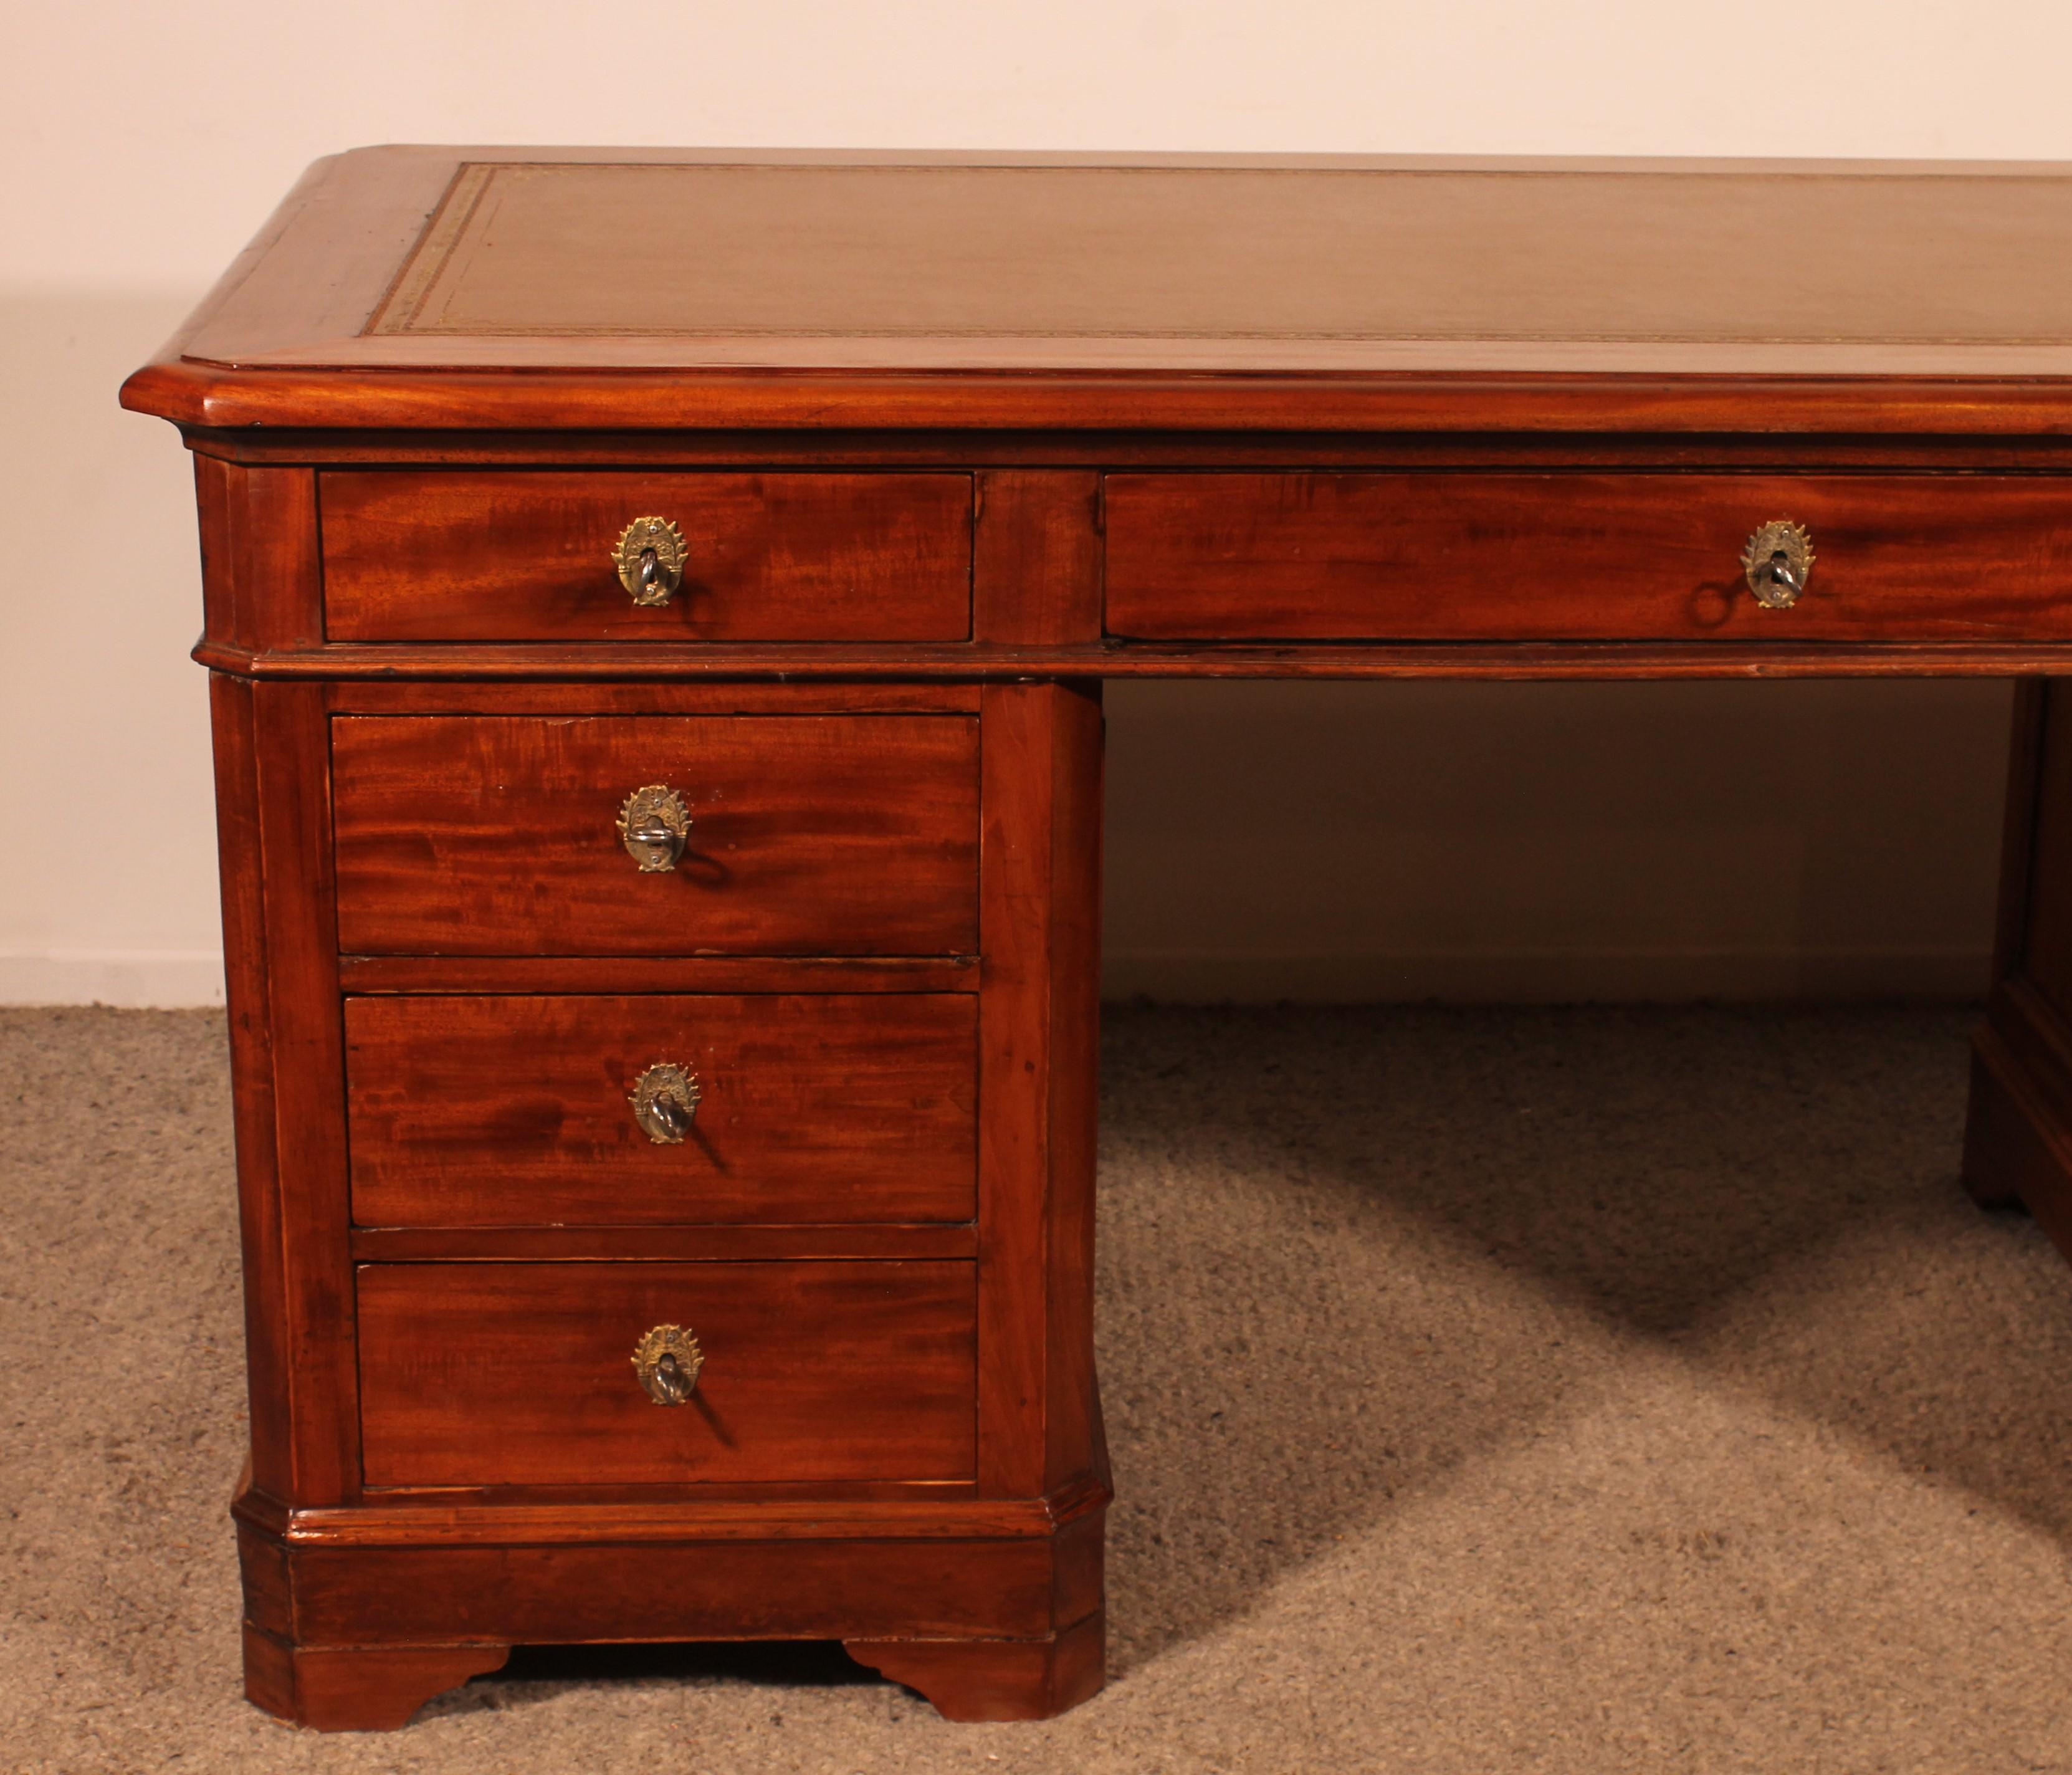 Elegant large mahogany pedestal desk from the 19th century from France

Very beautiful pedestal desk which has been worked on both sides which allows it to be placed in the middle of a room or against a wall.

The desk is composed of three drawers